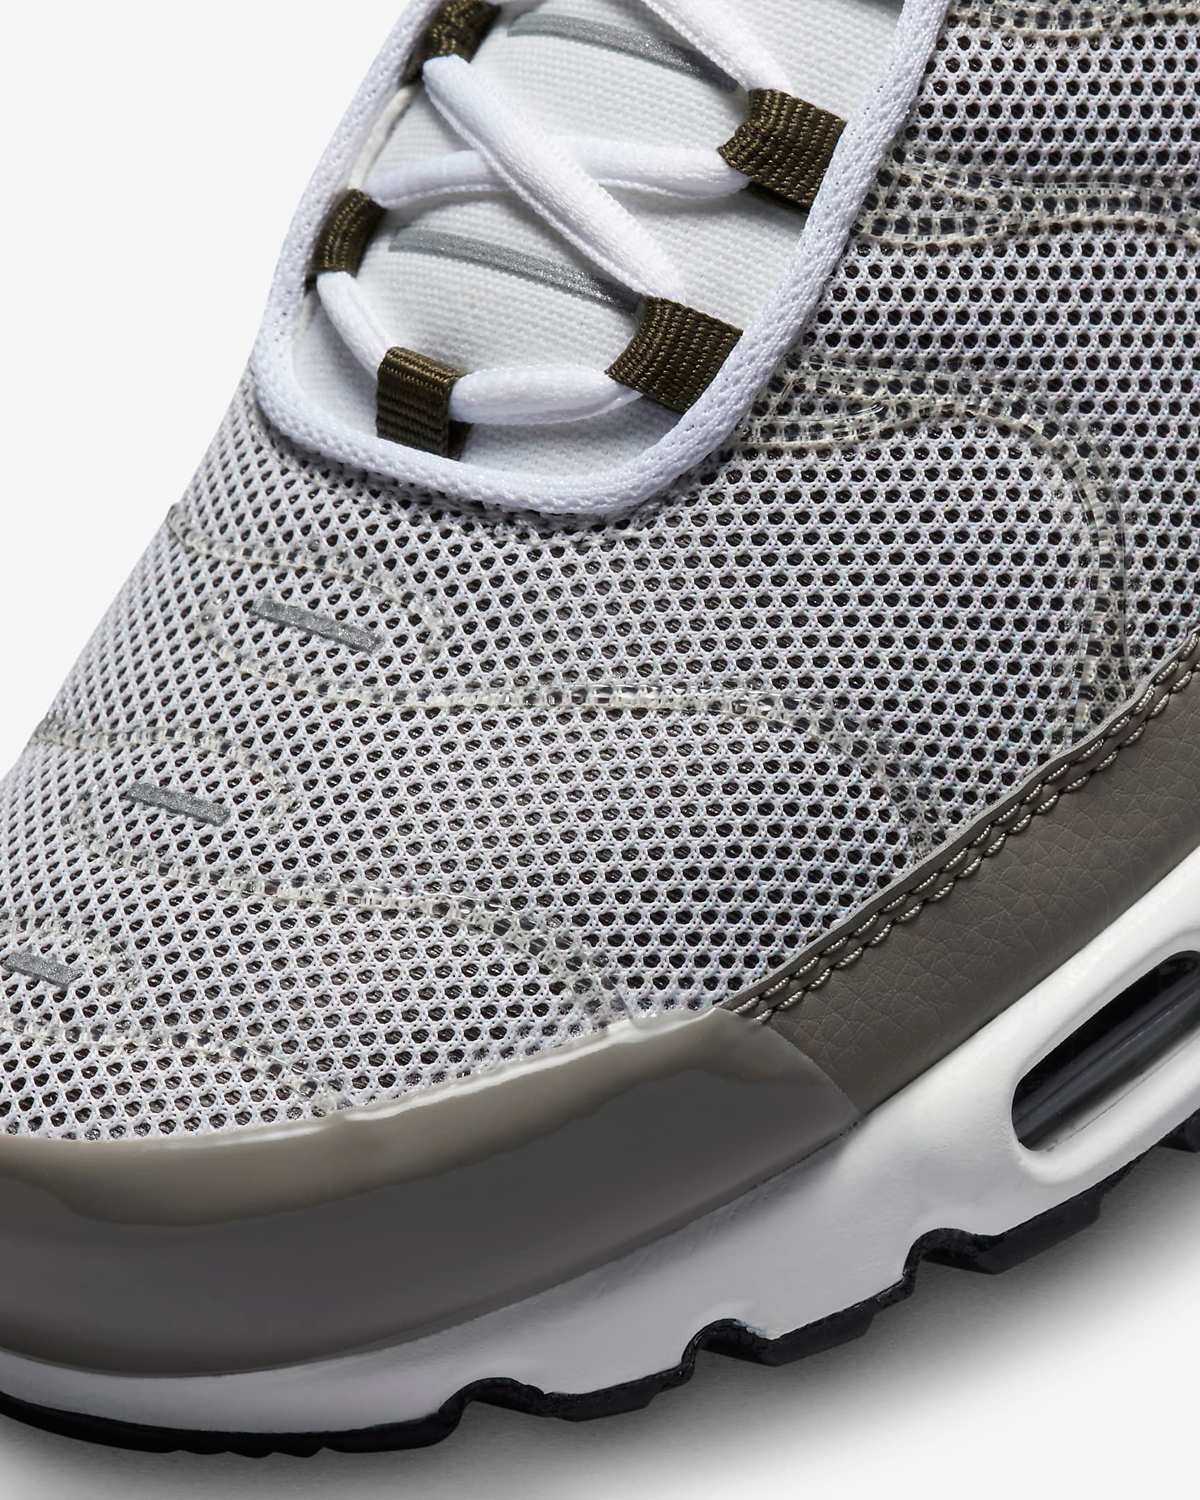 Nike-Air-Max-Plus-Flat-Pewter-Release-Date-7